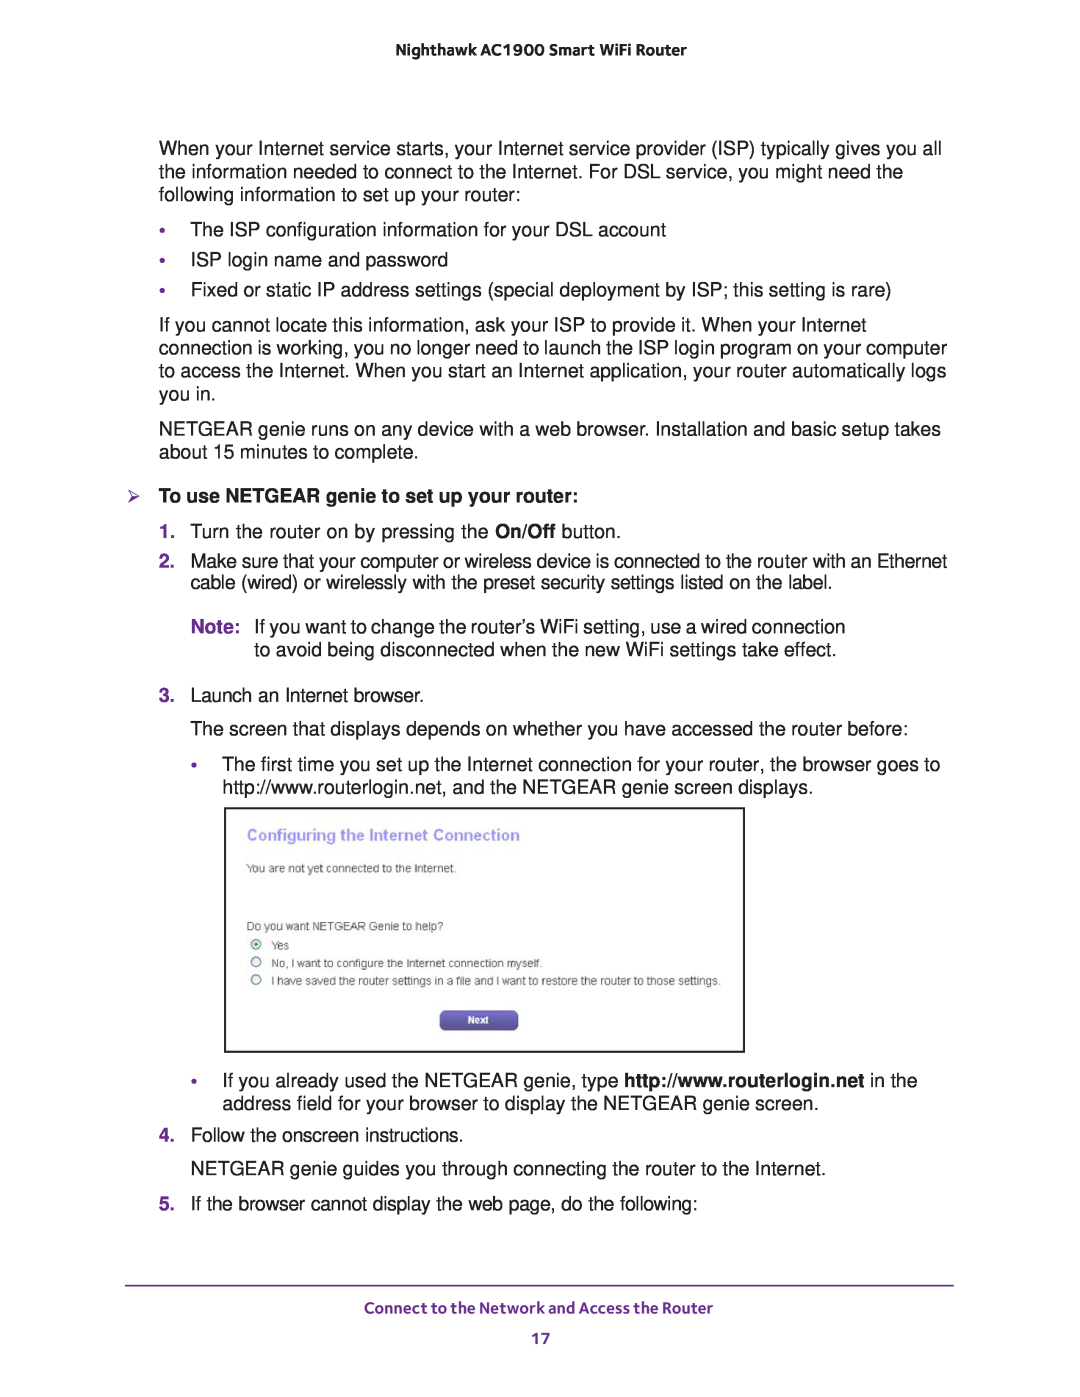 NETGEAR Model R7000 user manual  To use NETGEAR genie to set up your router 